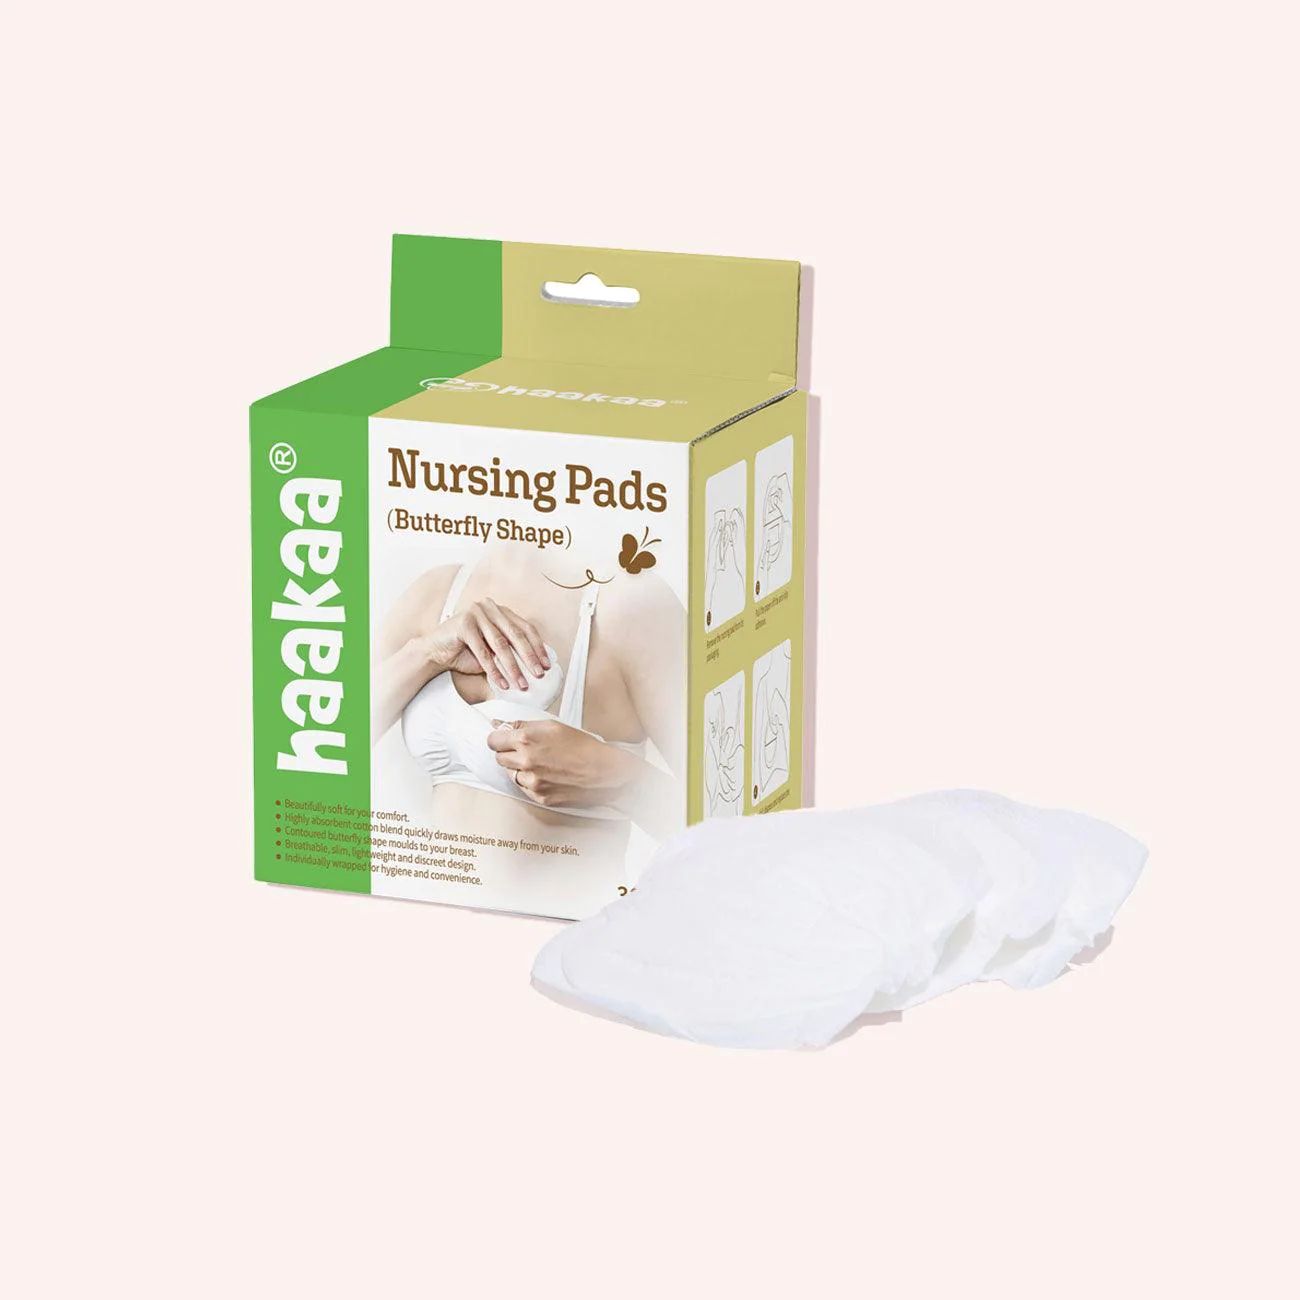 Disposable Nursing Pads - 36 pack by Haakaa | the memo | The Memo (Australia & New Zealand)